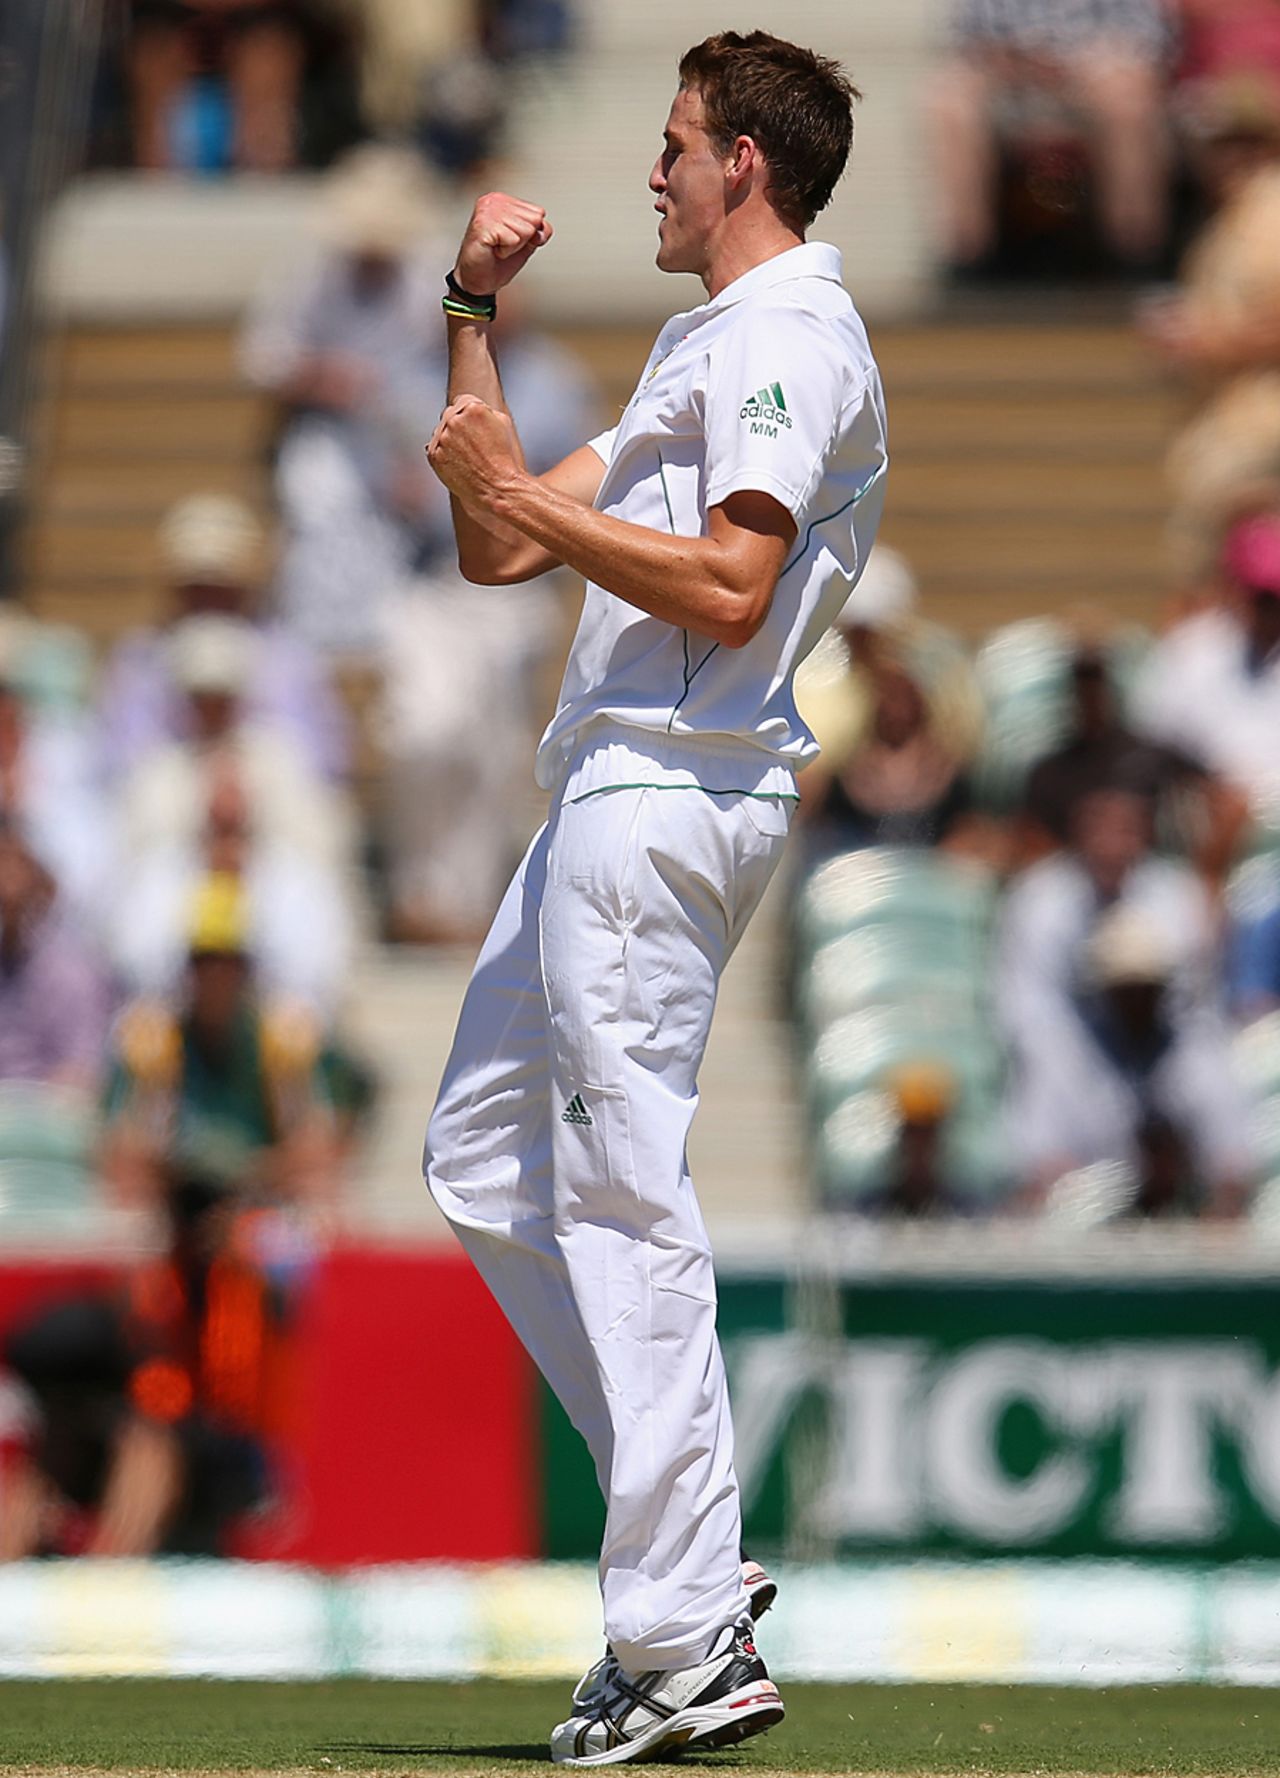 Morne Morkel took two wickets, but couldn't stop Australia's onslaught, Australia v South Africa, 2nd Test, Adelaide, 1st day, November 22, 2012